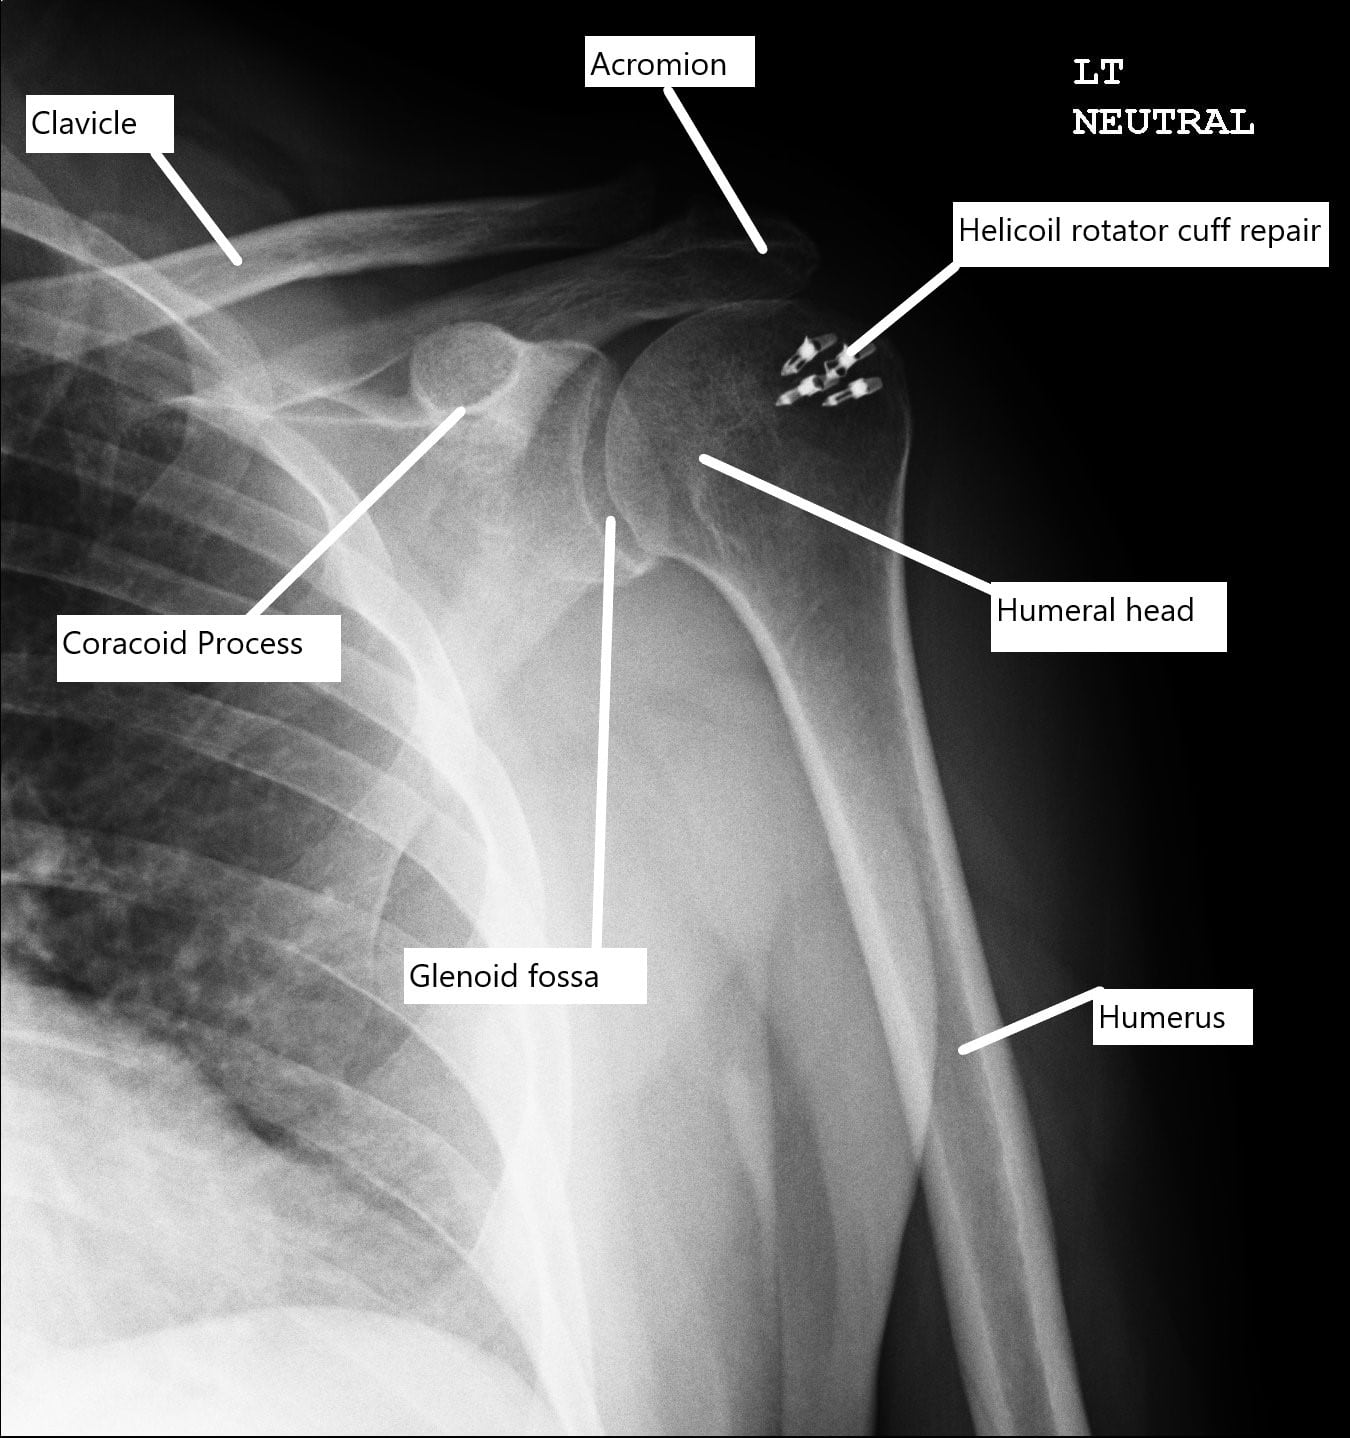 Postoperative X-ray of the shoulder with rotator cuff repair.